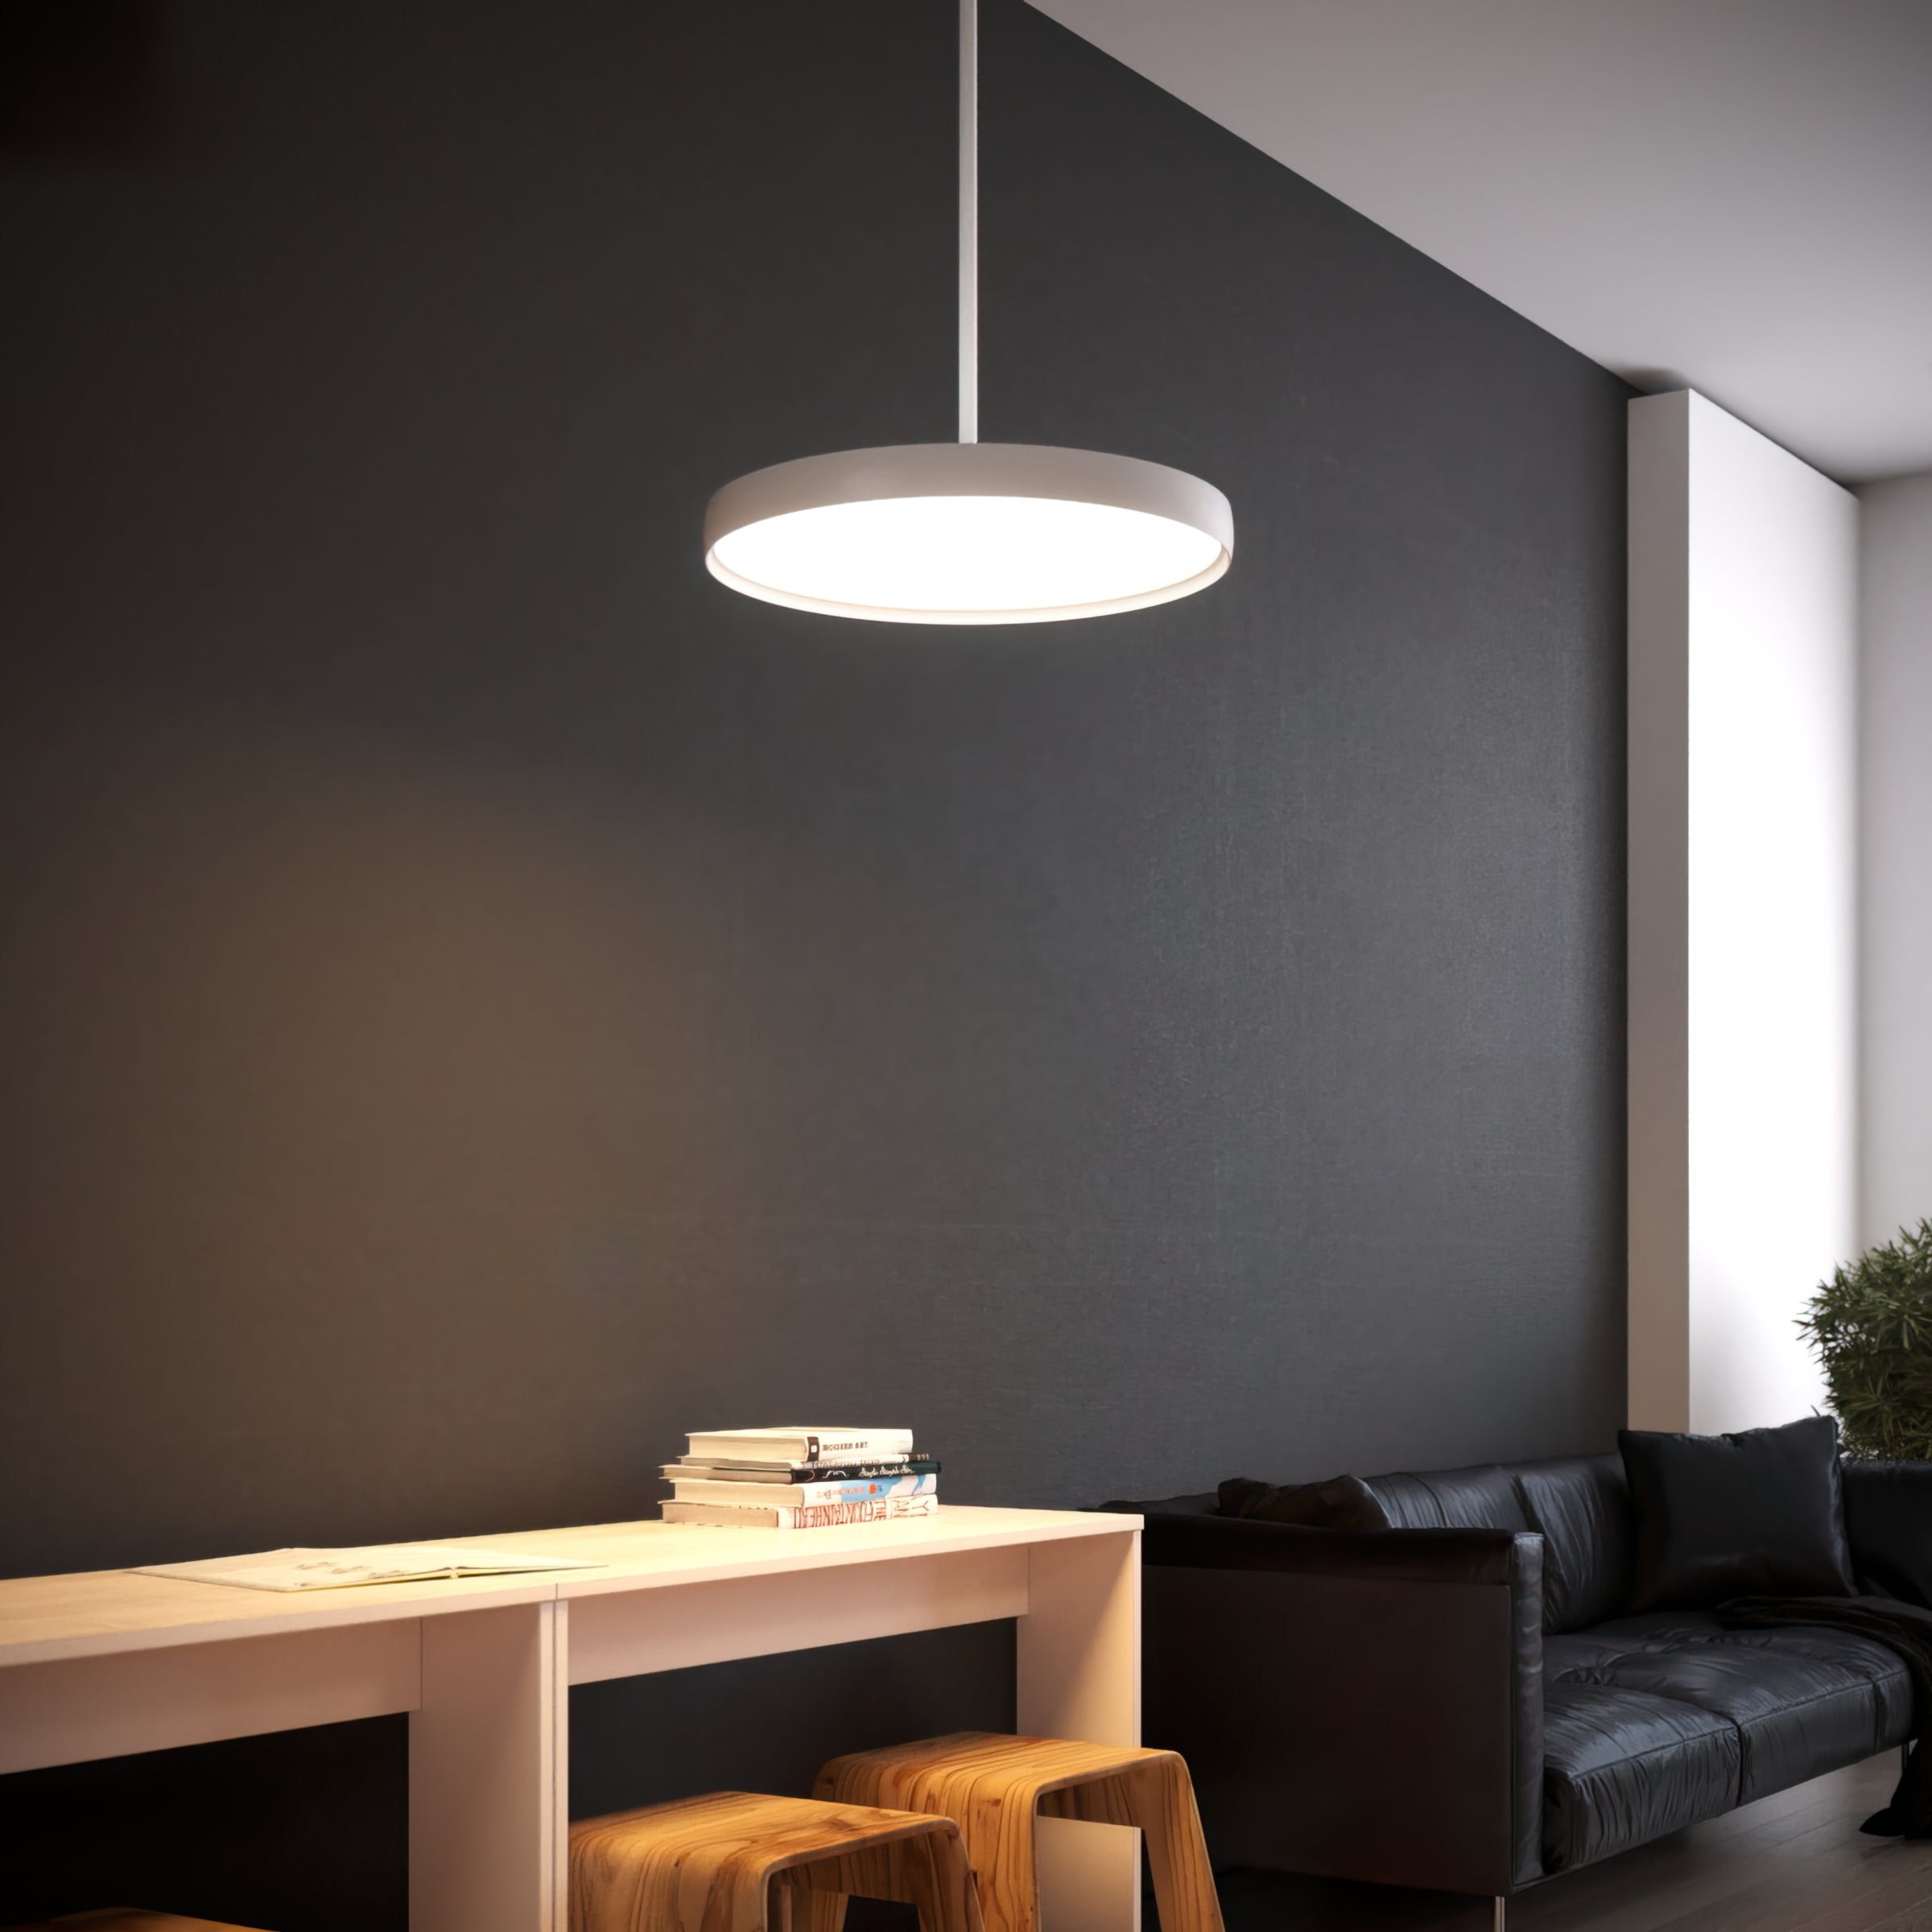 An Absolute Guide to Low-Voltage Lighting for Your Home